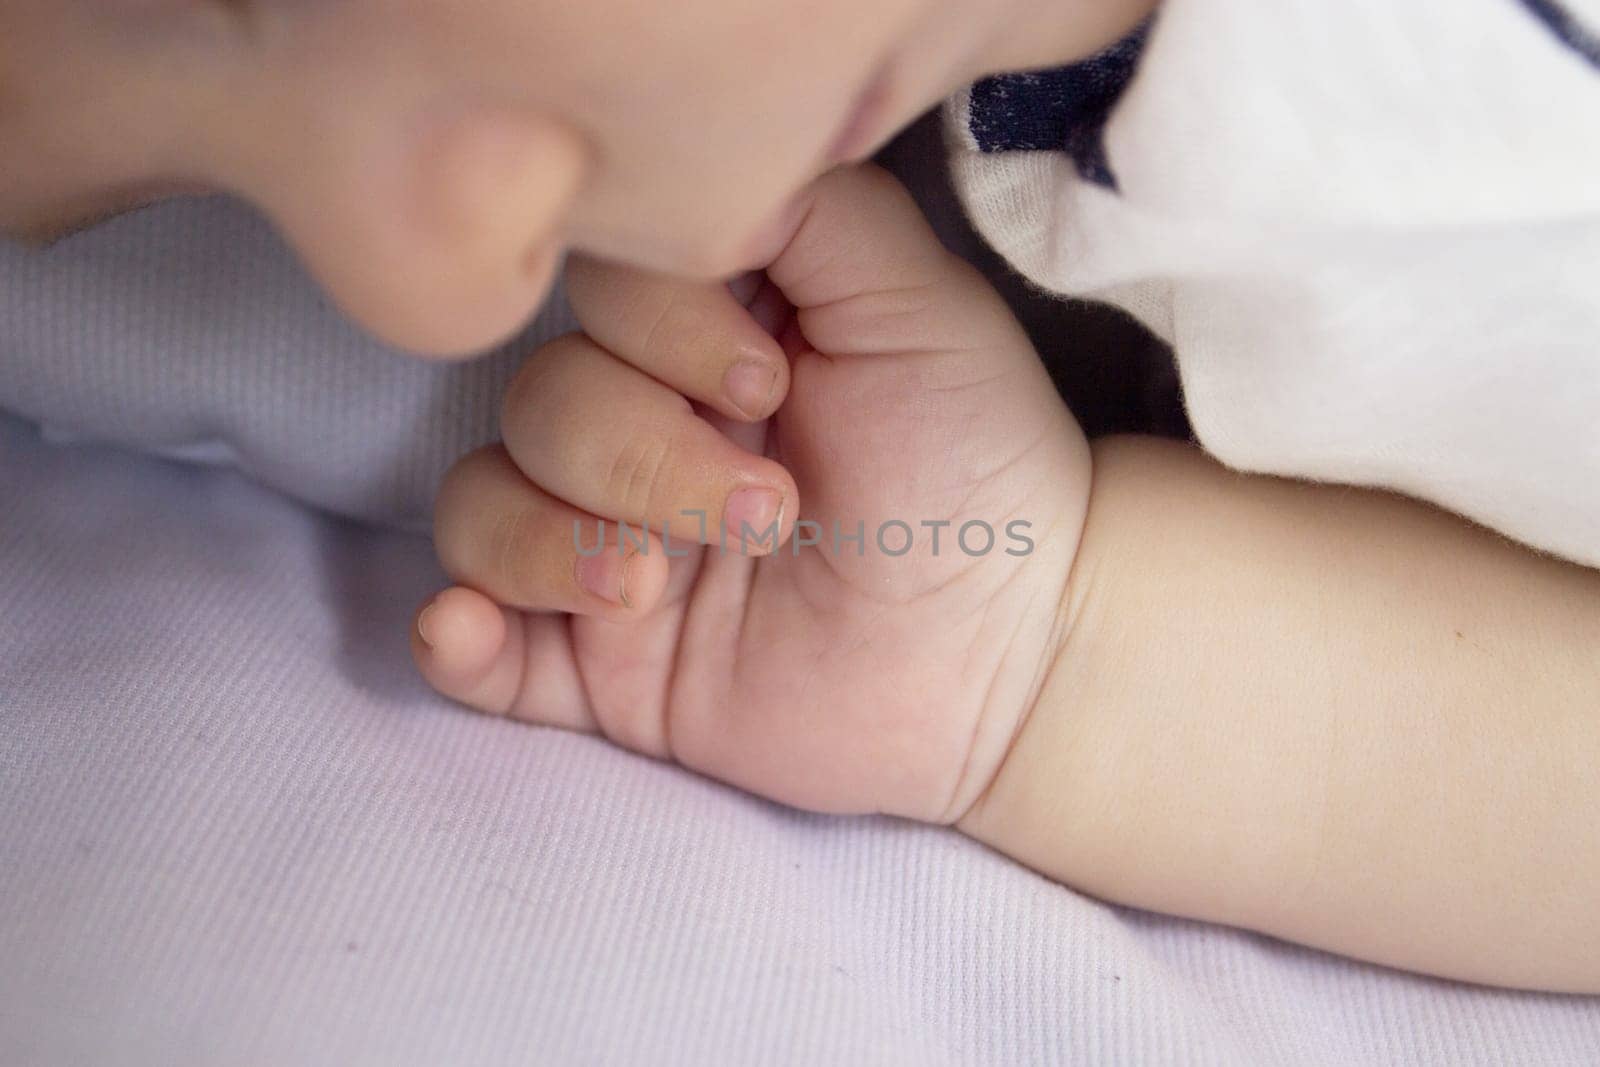 Two month old baby hand by GemaIbarra